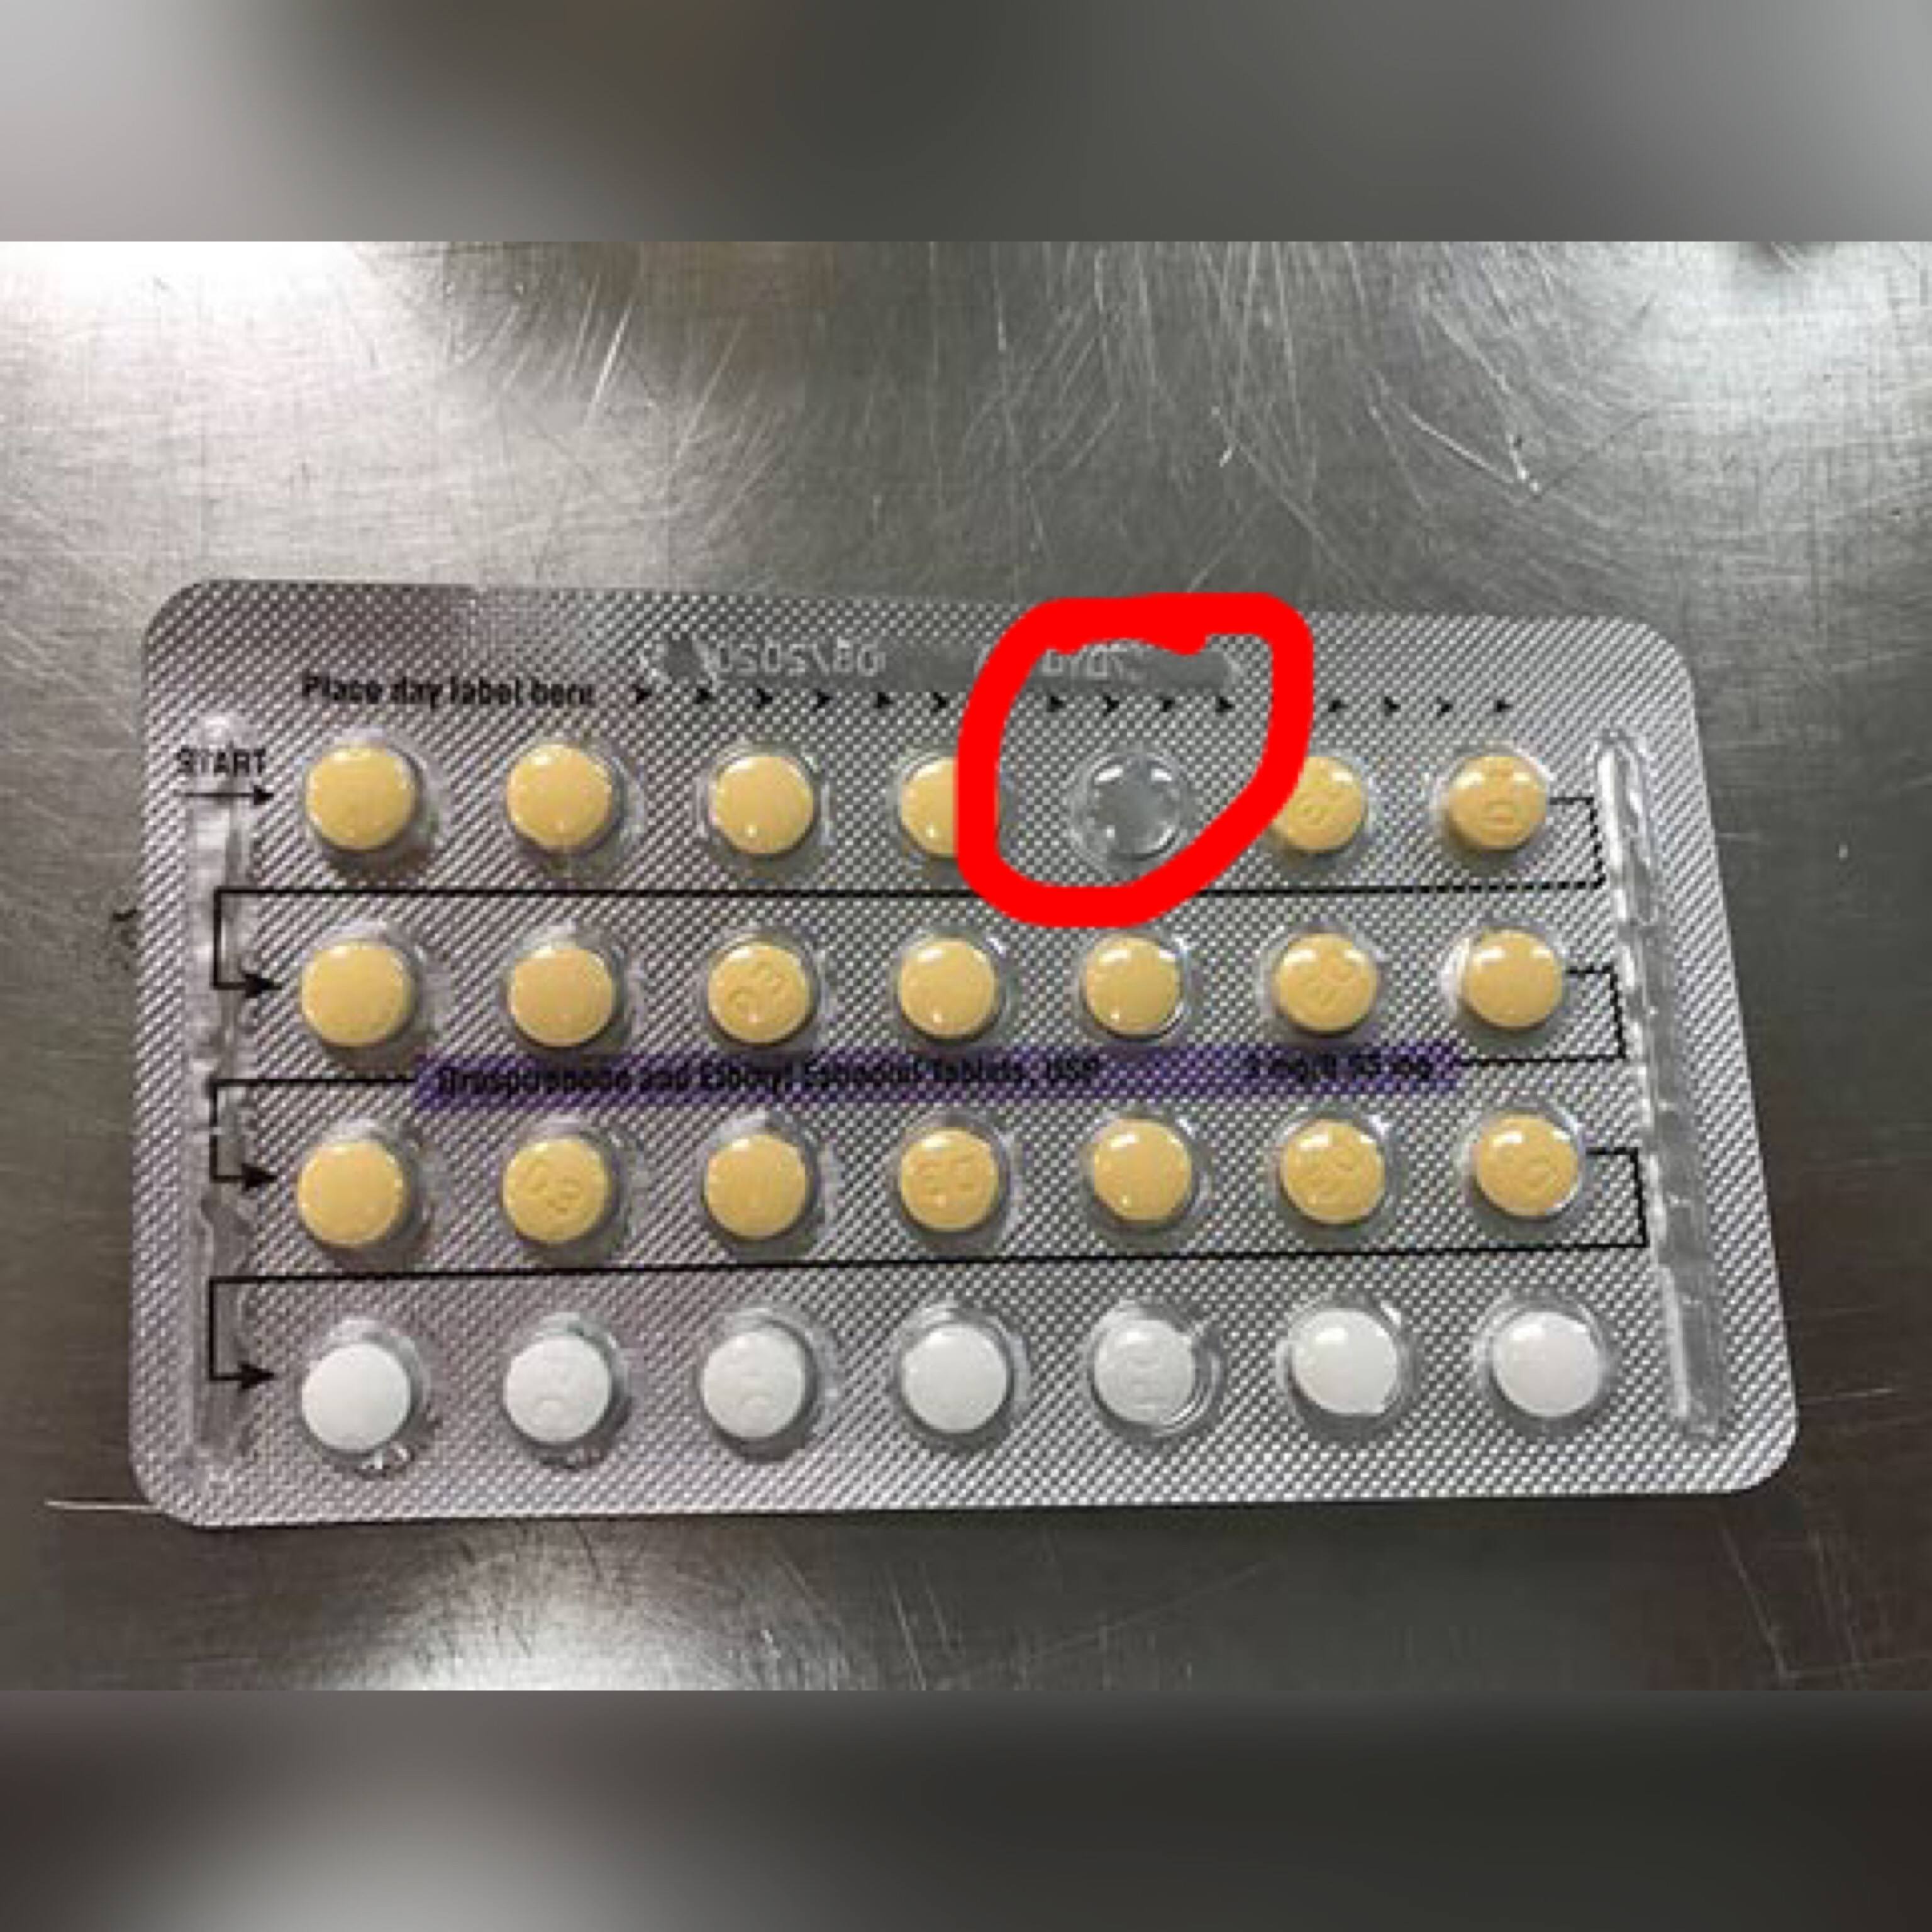 Birth Control Pills Recalled Because Of A Packaging Error That Could Result...